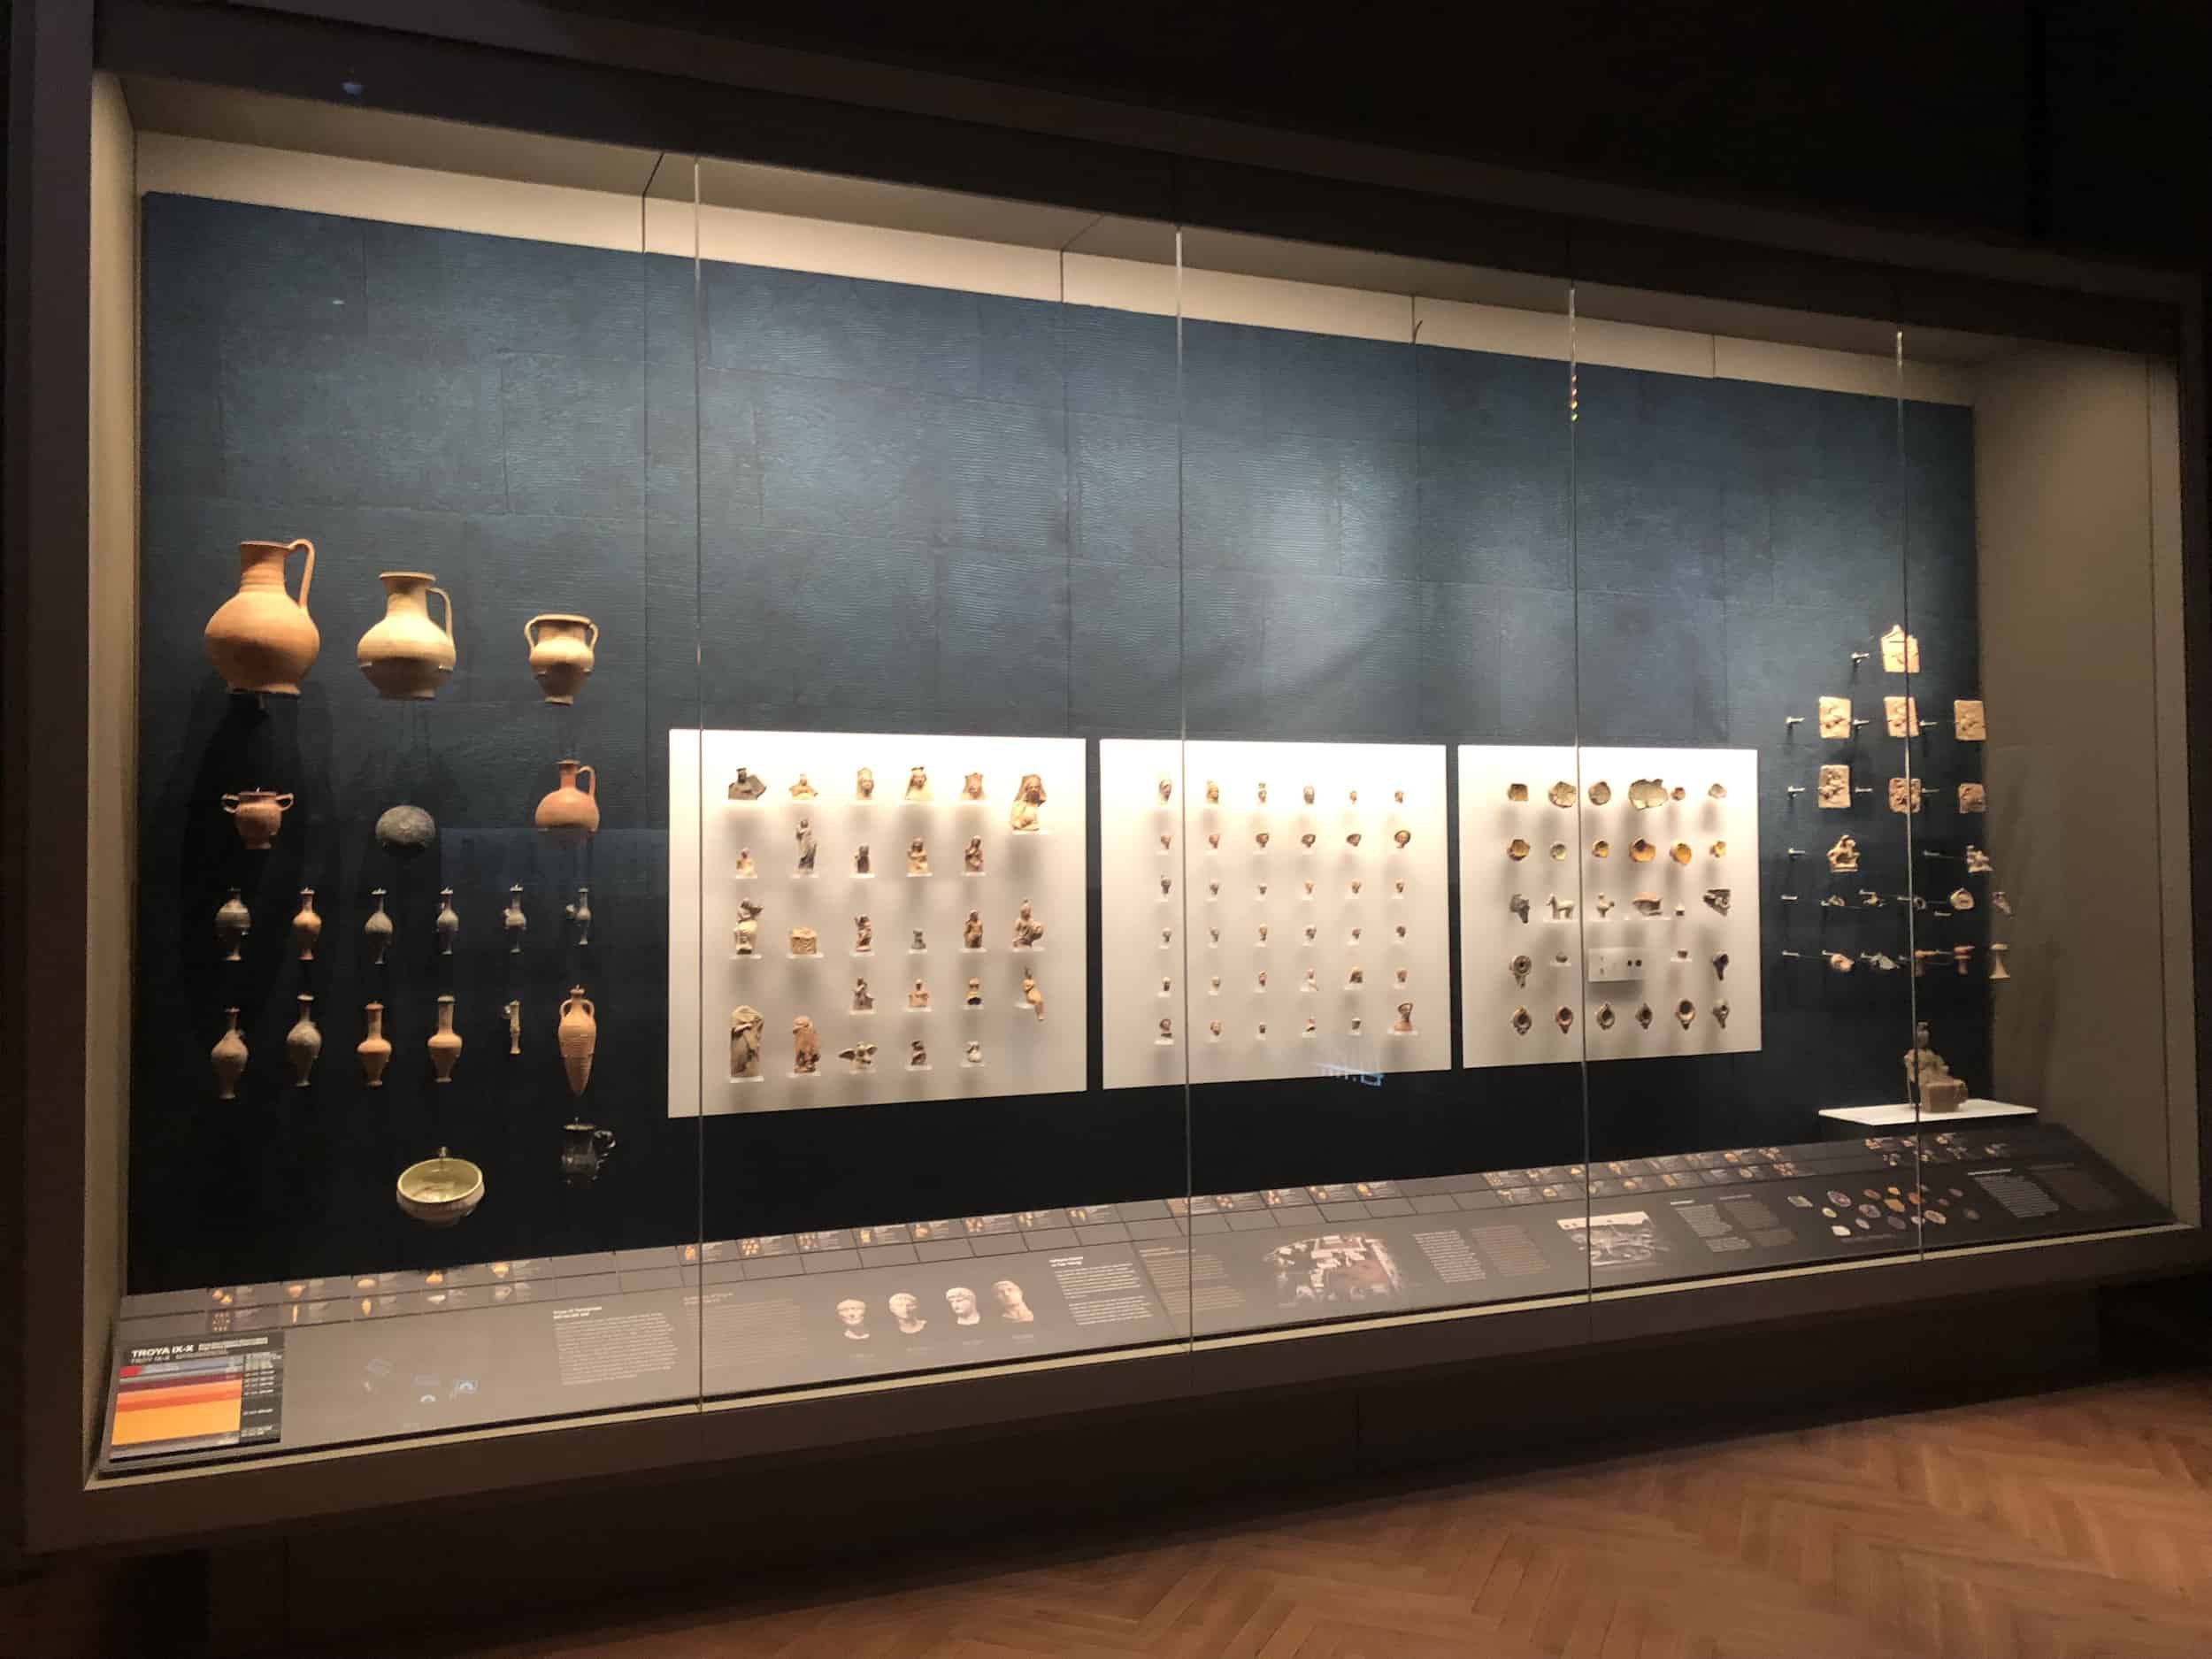 Findings from Troy IX-X at the Istanbul Archaeology Museum in Istanbul, Turkey